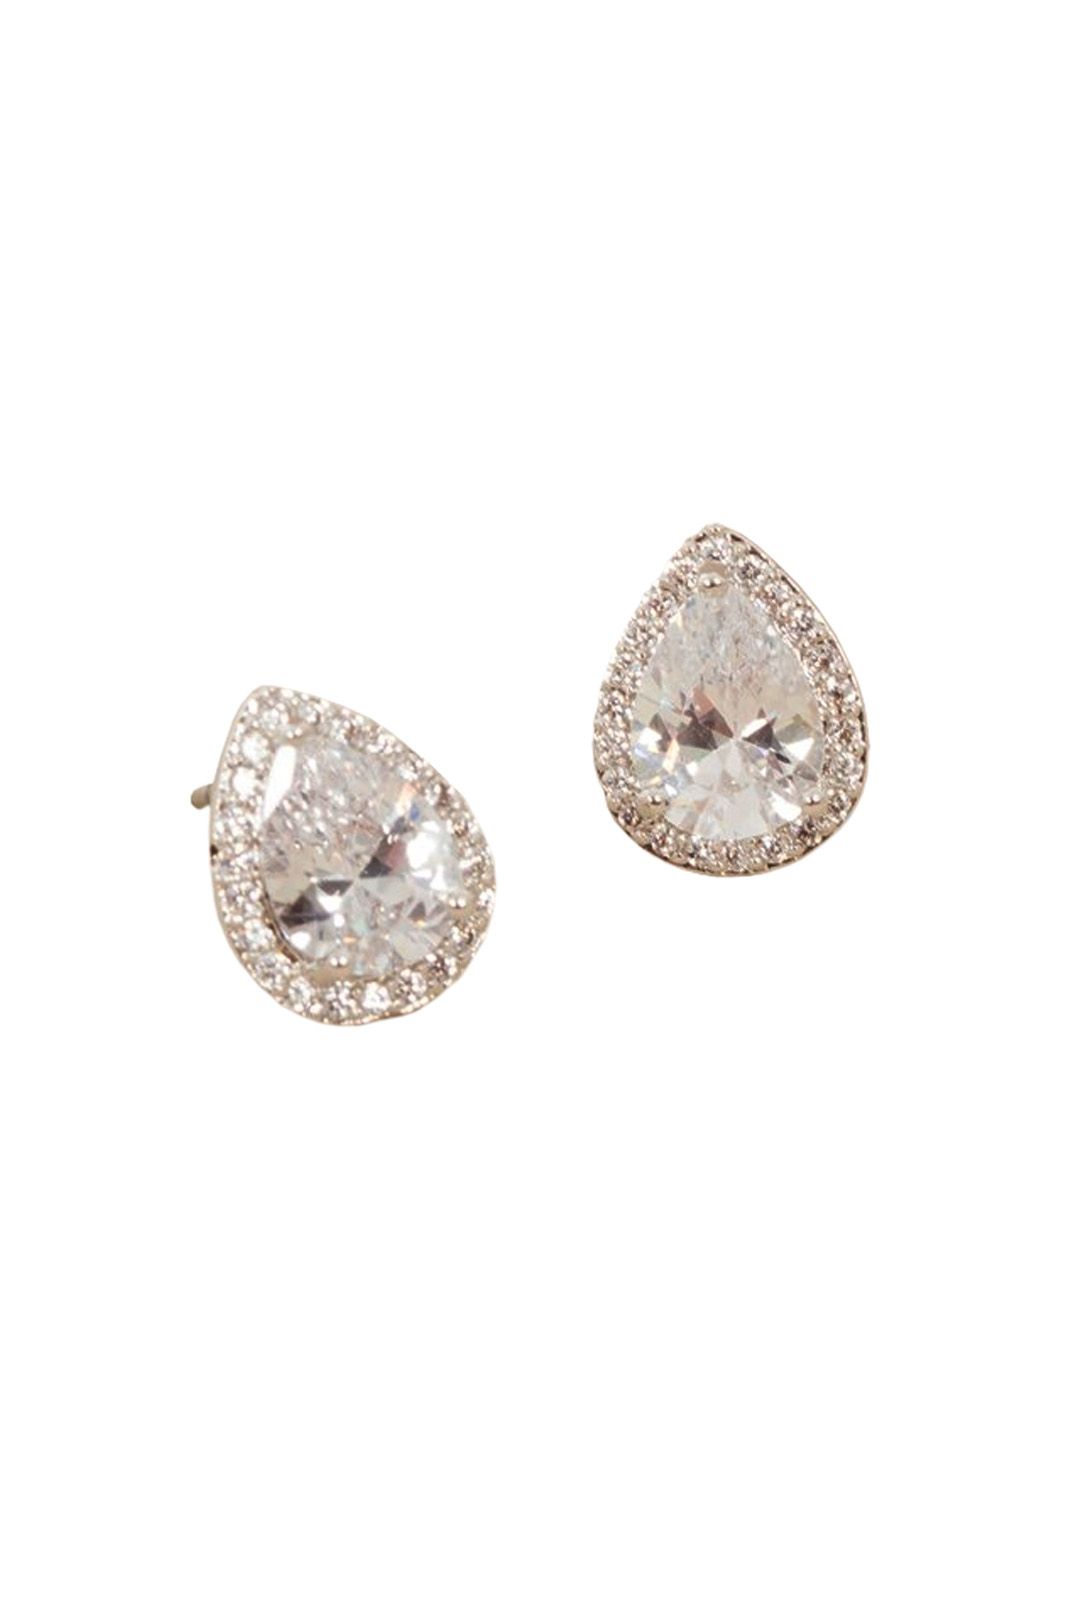 Adorne - CZ Diamante Edge Jewelled Pear Stud Earring - Silver - Front